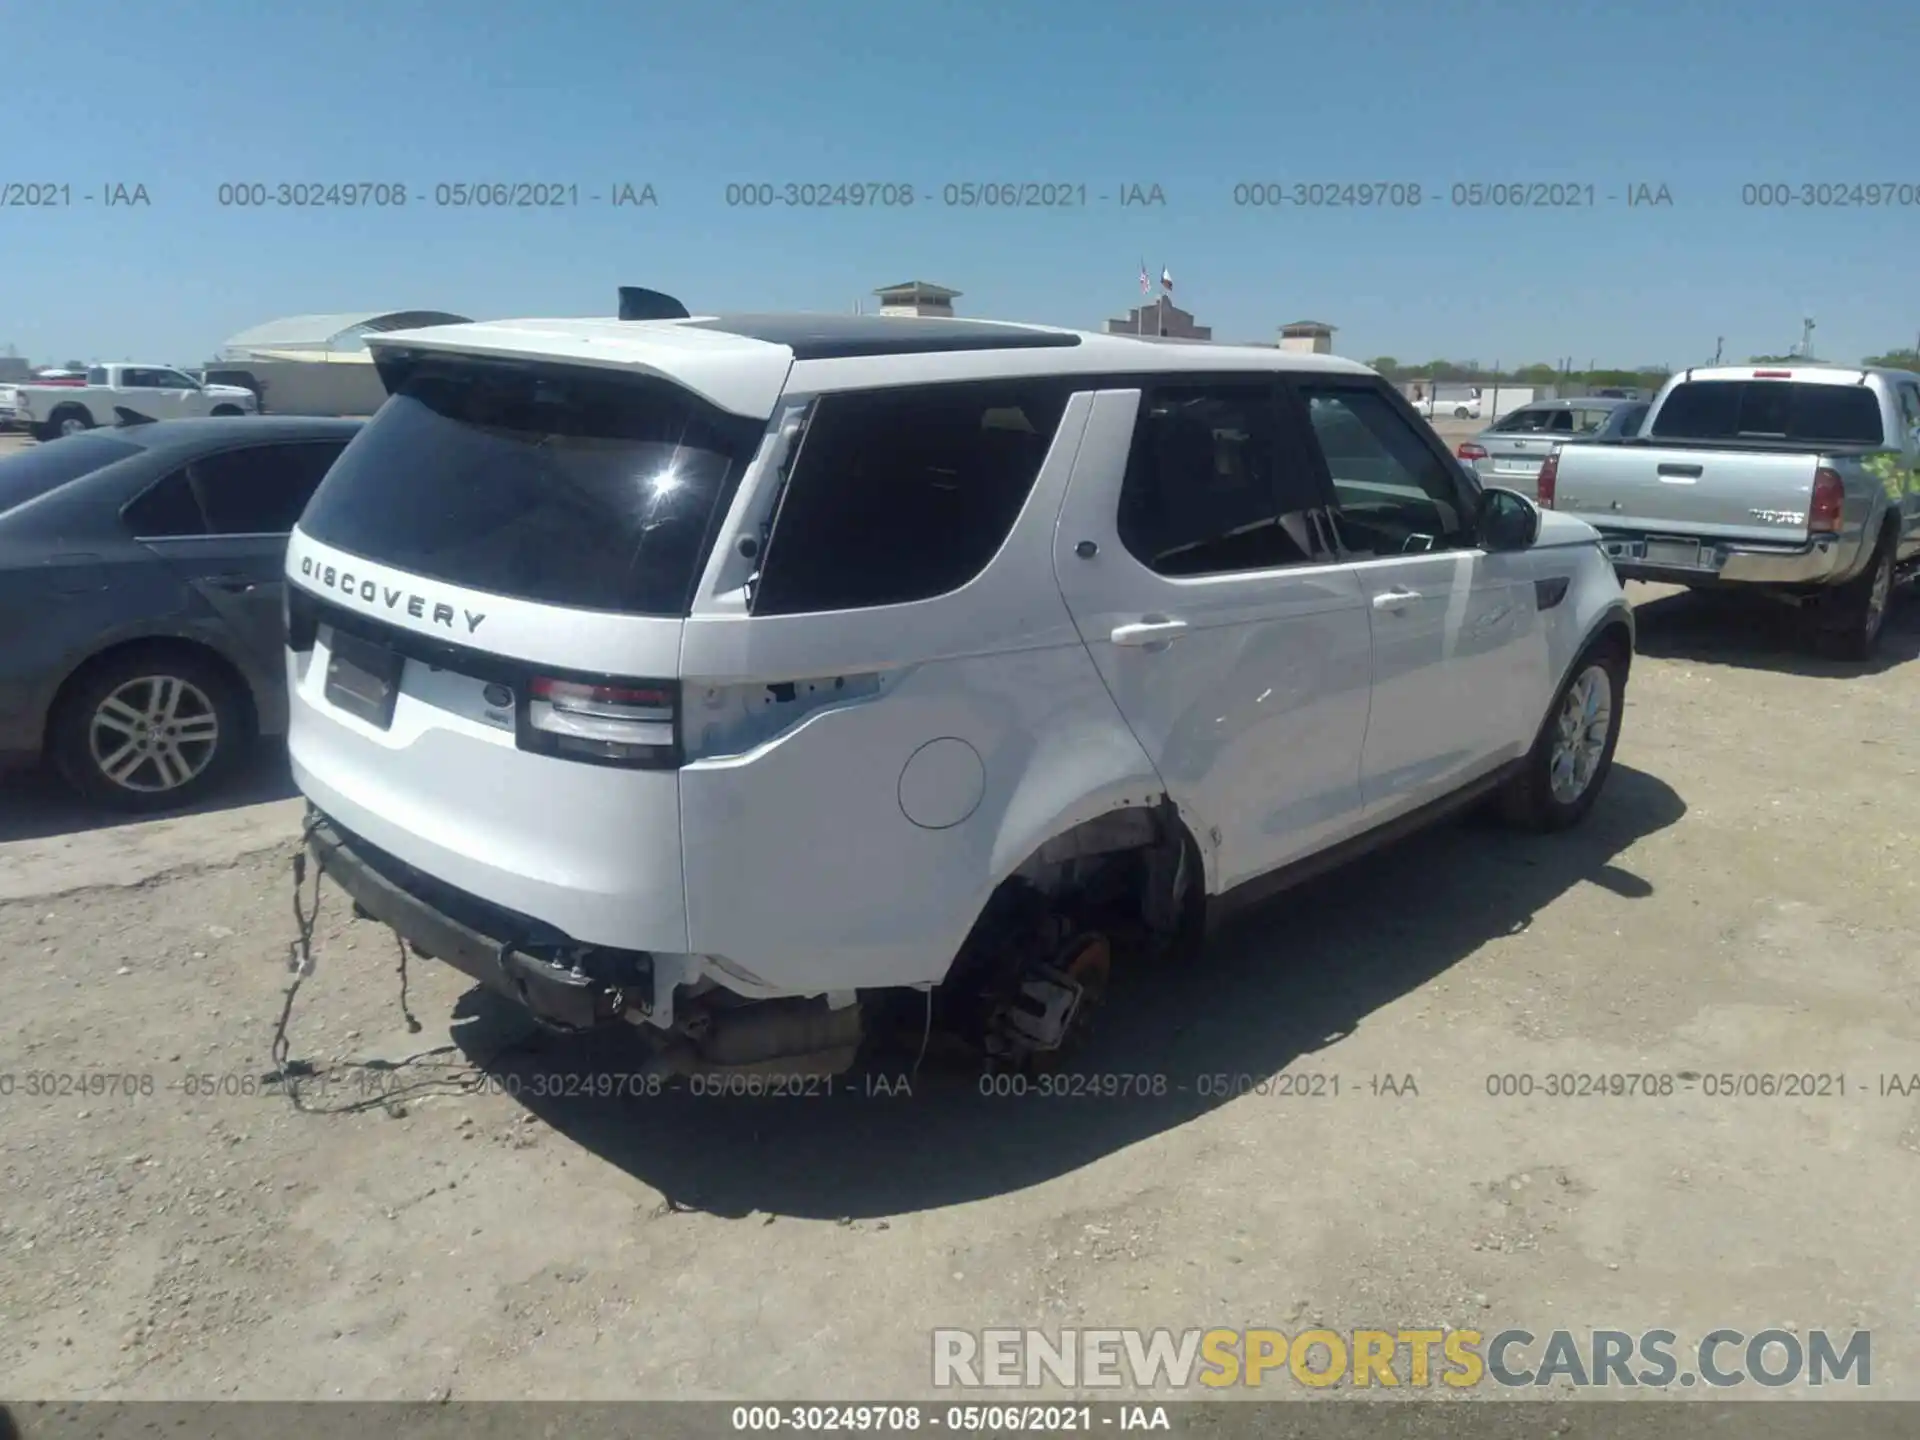 4 Photograph of a damaged car SALRG2RV4L2417250 LAND ROVER DISCOVERY 2020